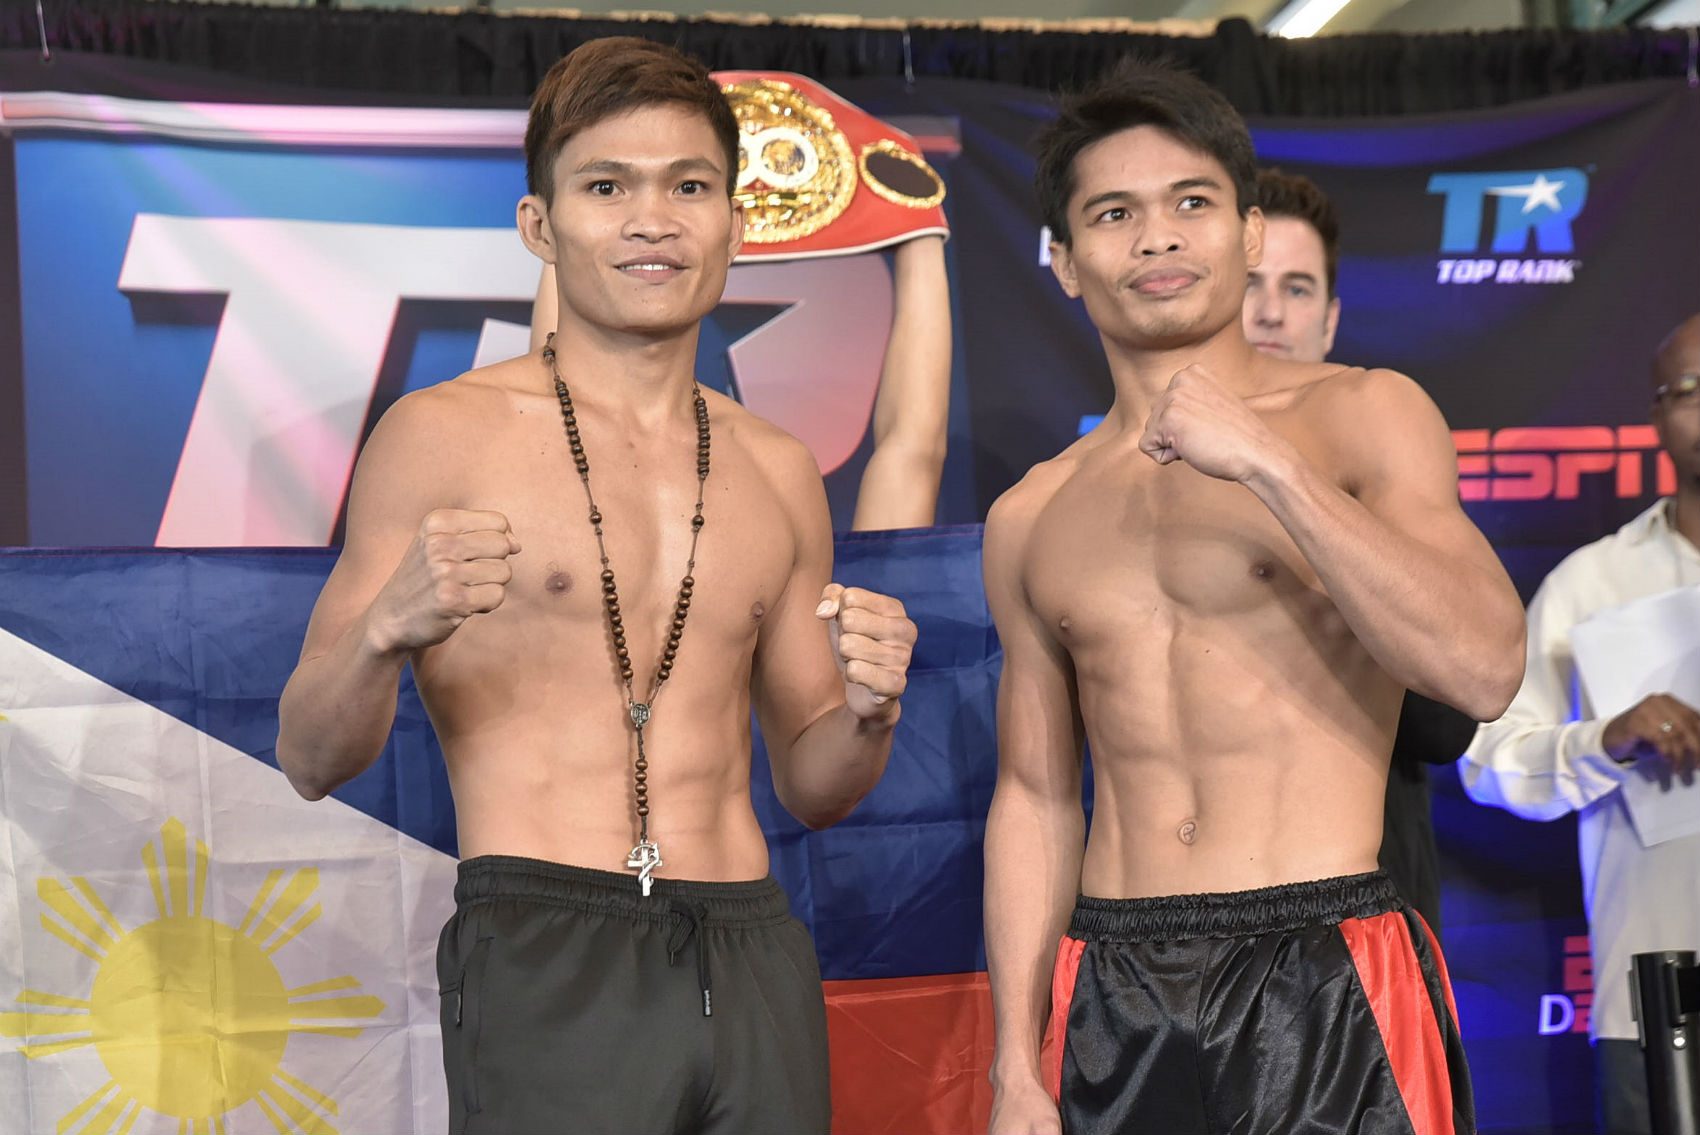 Locked and weighed in: Ancajas, Sultan slug it out for world title